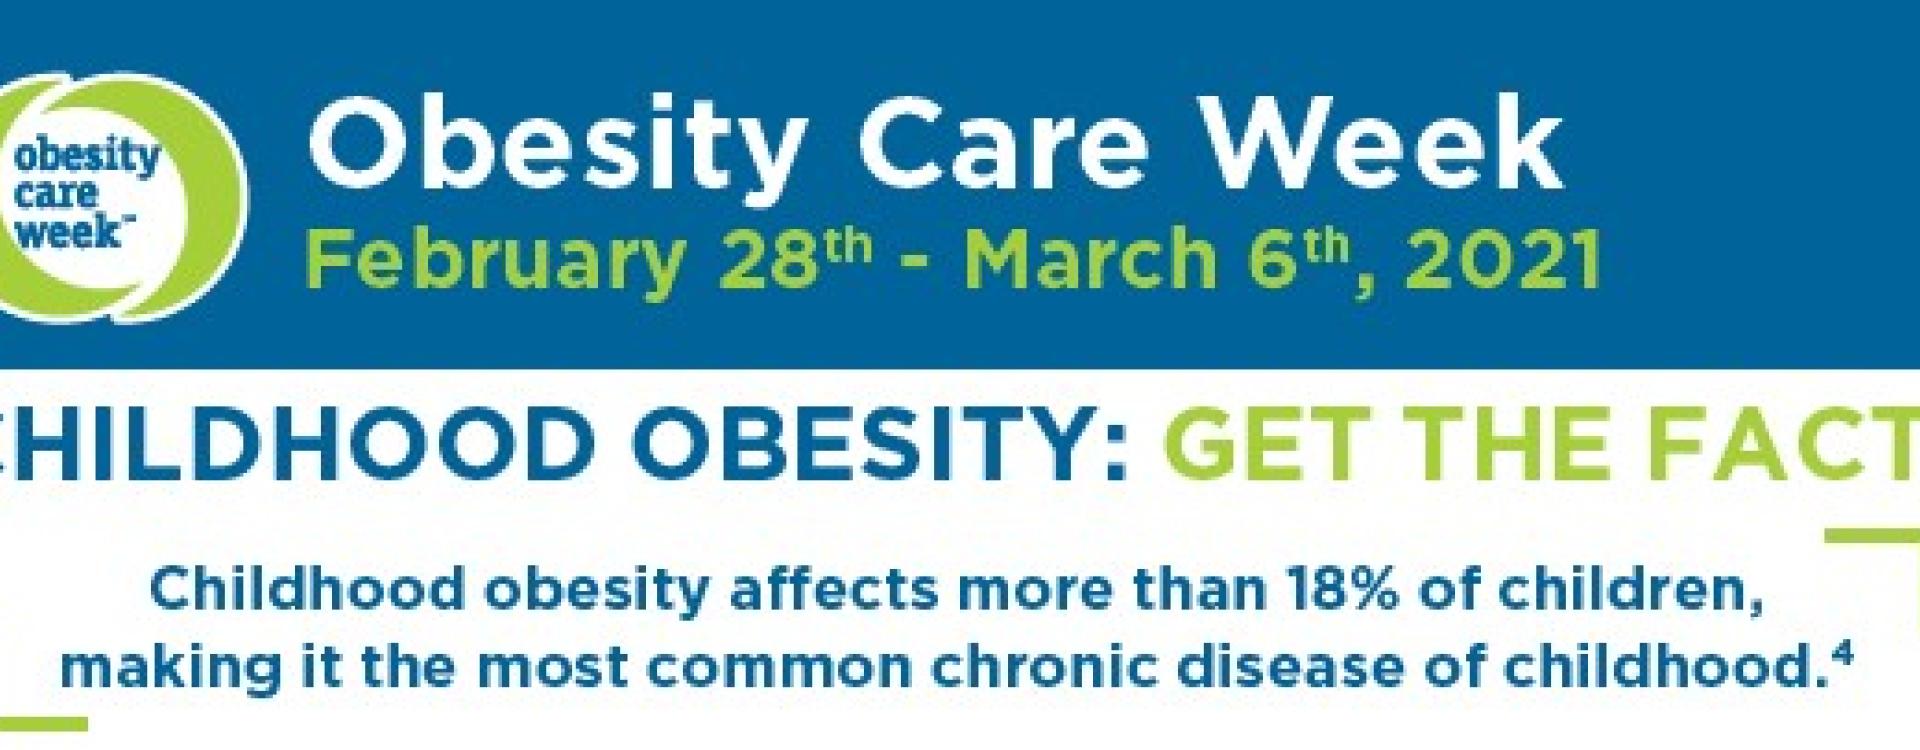 obesity care week banner